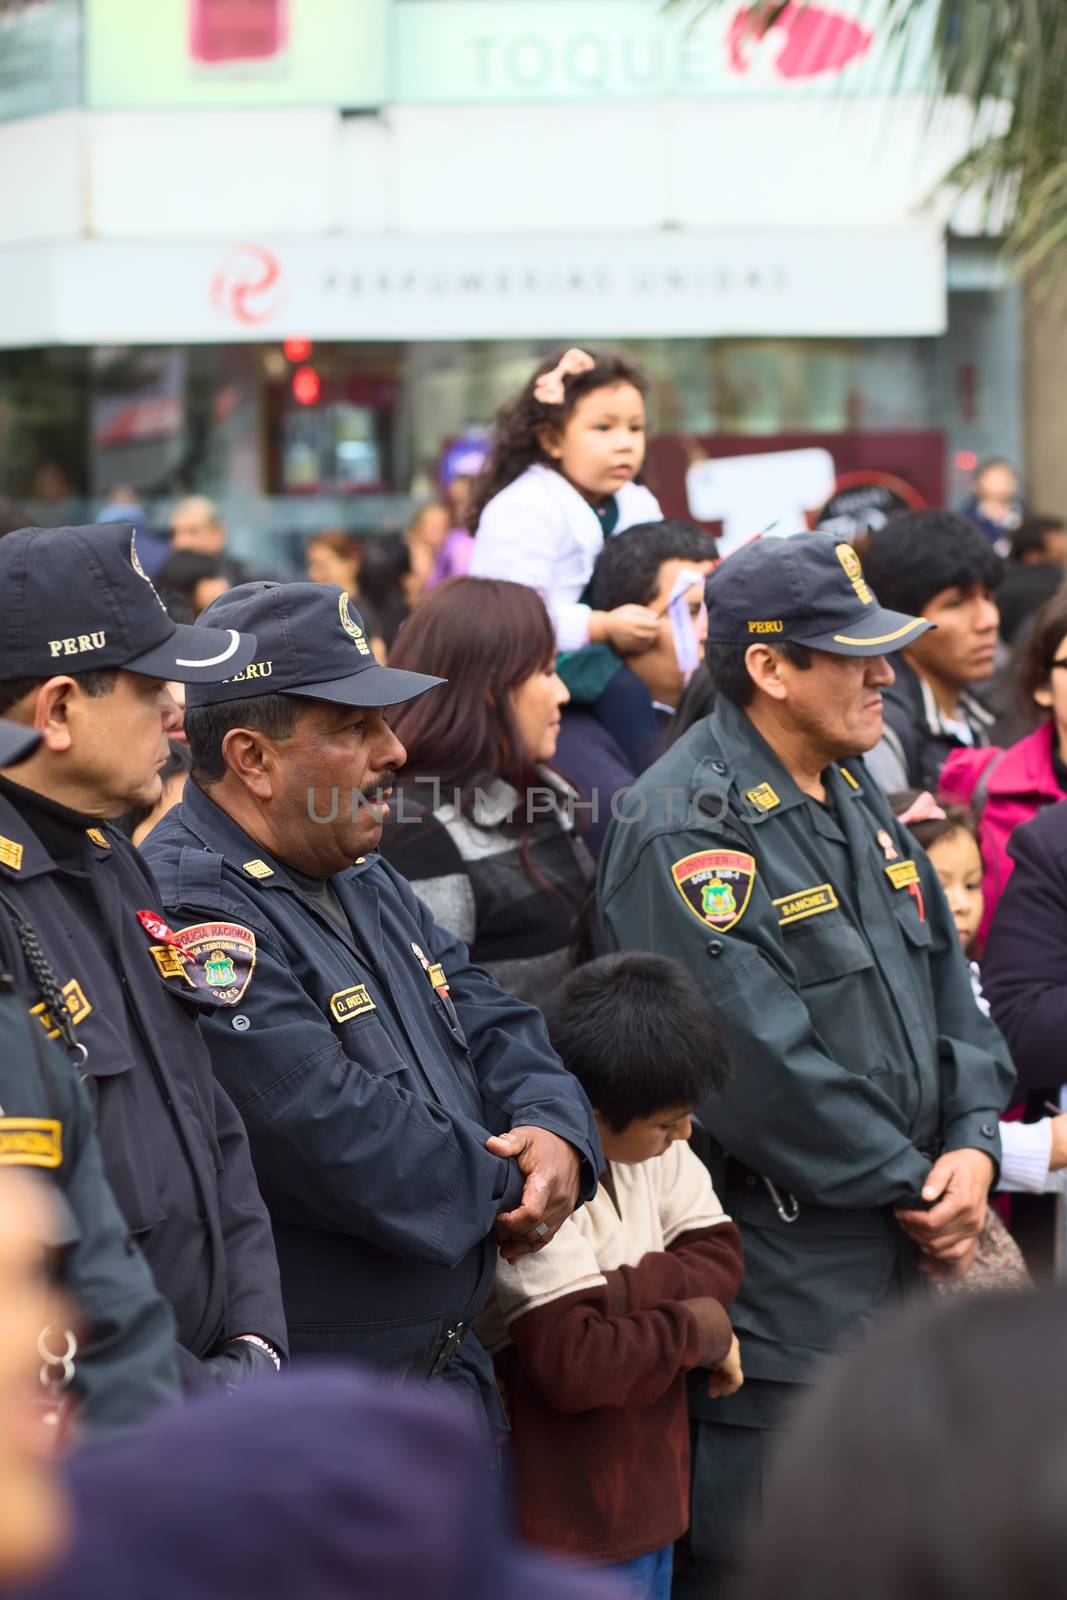 Policemen on the Wong Parade in Lima, Peru by sven